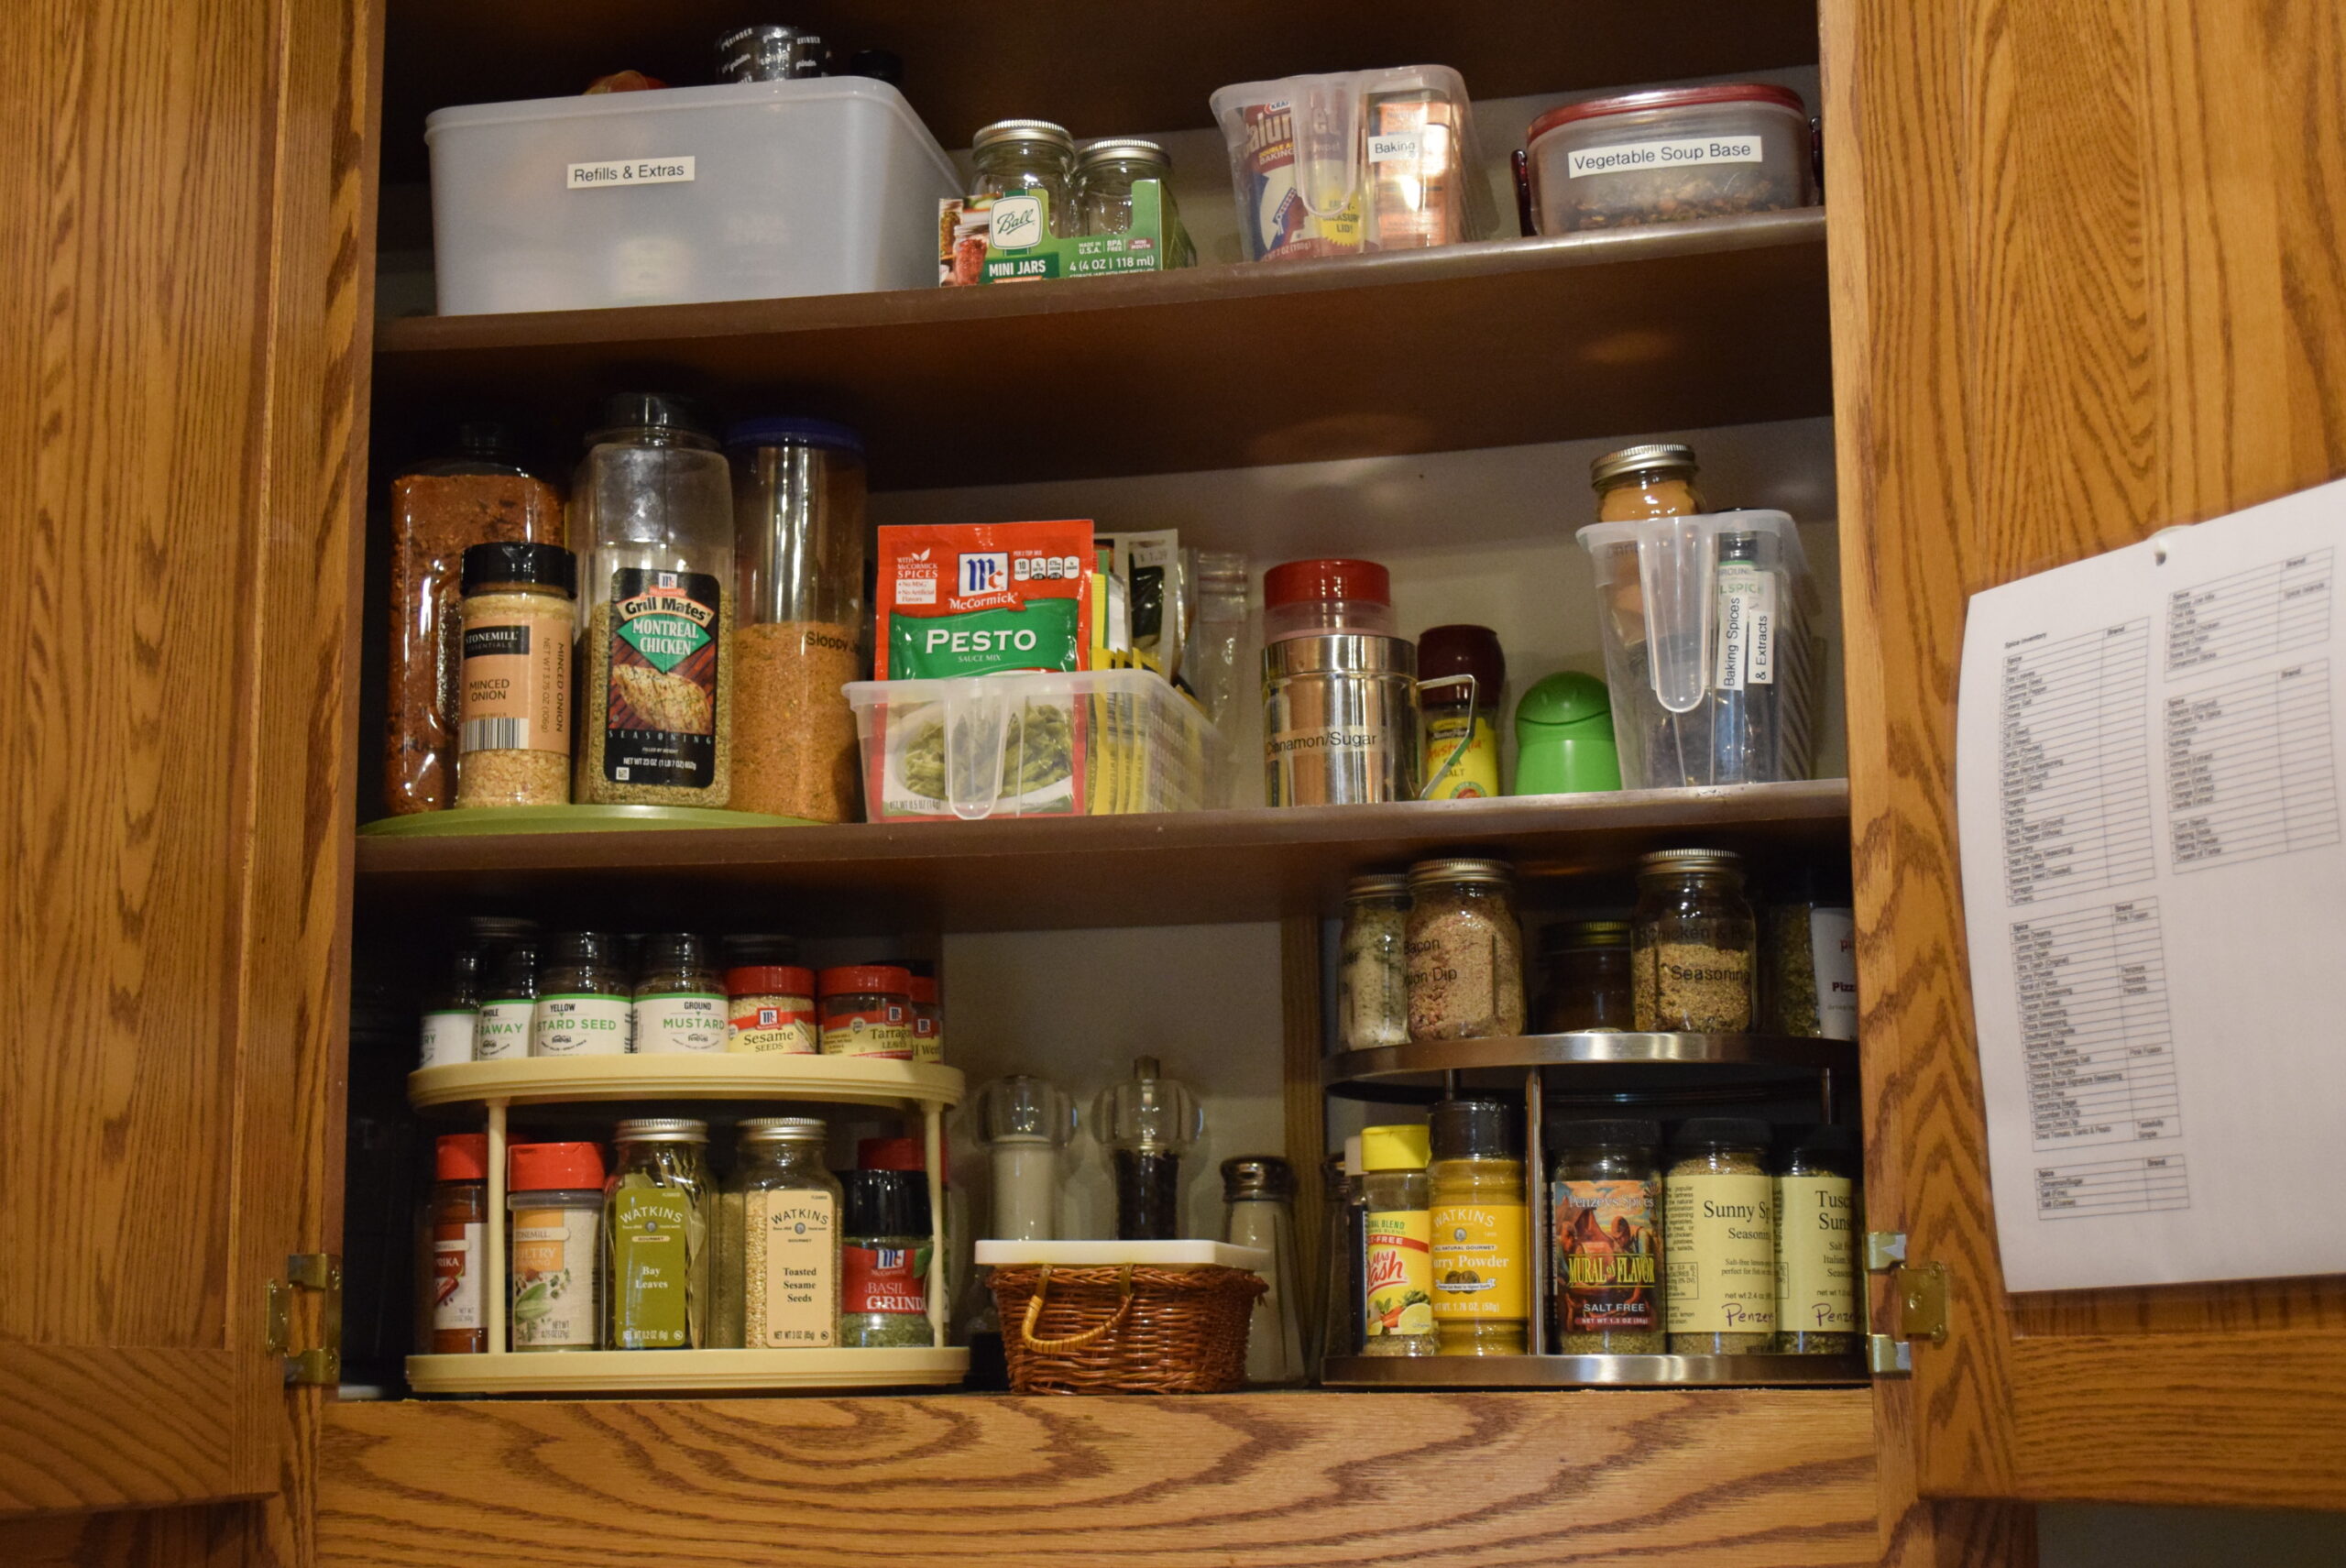 Spice Cabinet and Spice Inventory After Organization